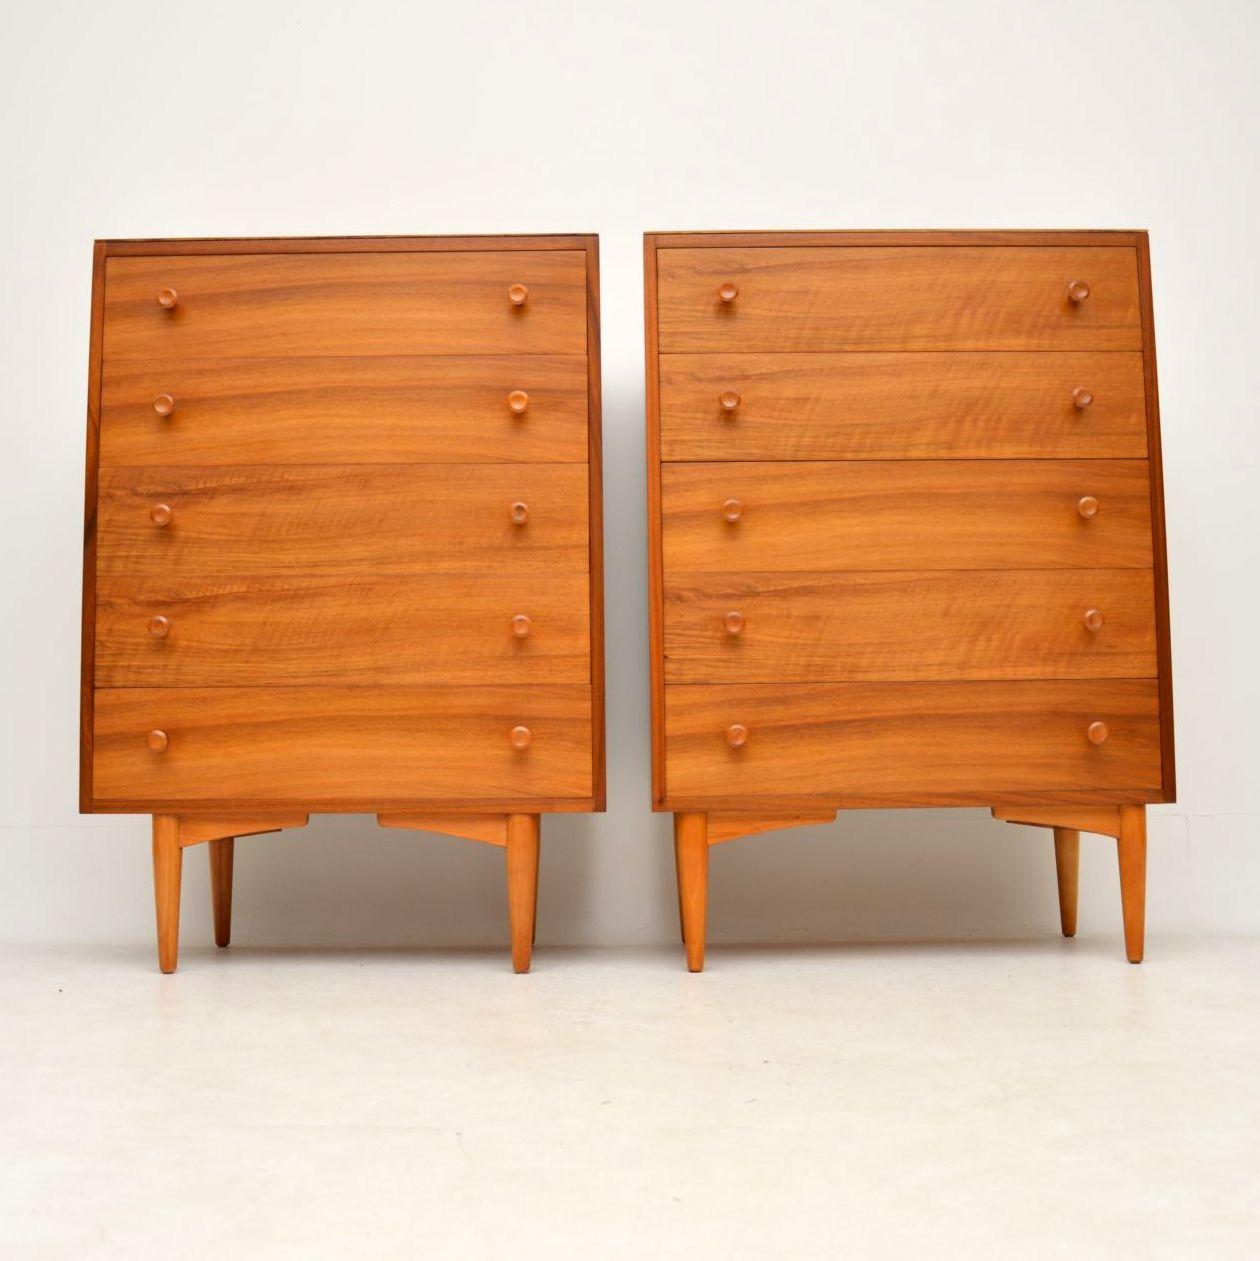 A beautiful pair of matching vintage walnut chest of drawers, these date from the 1960s. It’s really hard to find a large matching pair like this, especially ones that are so beautifully designed. They have lots of storage space, have stunning